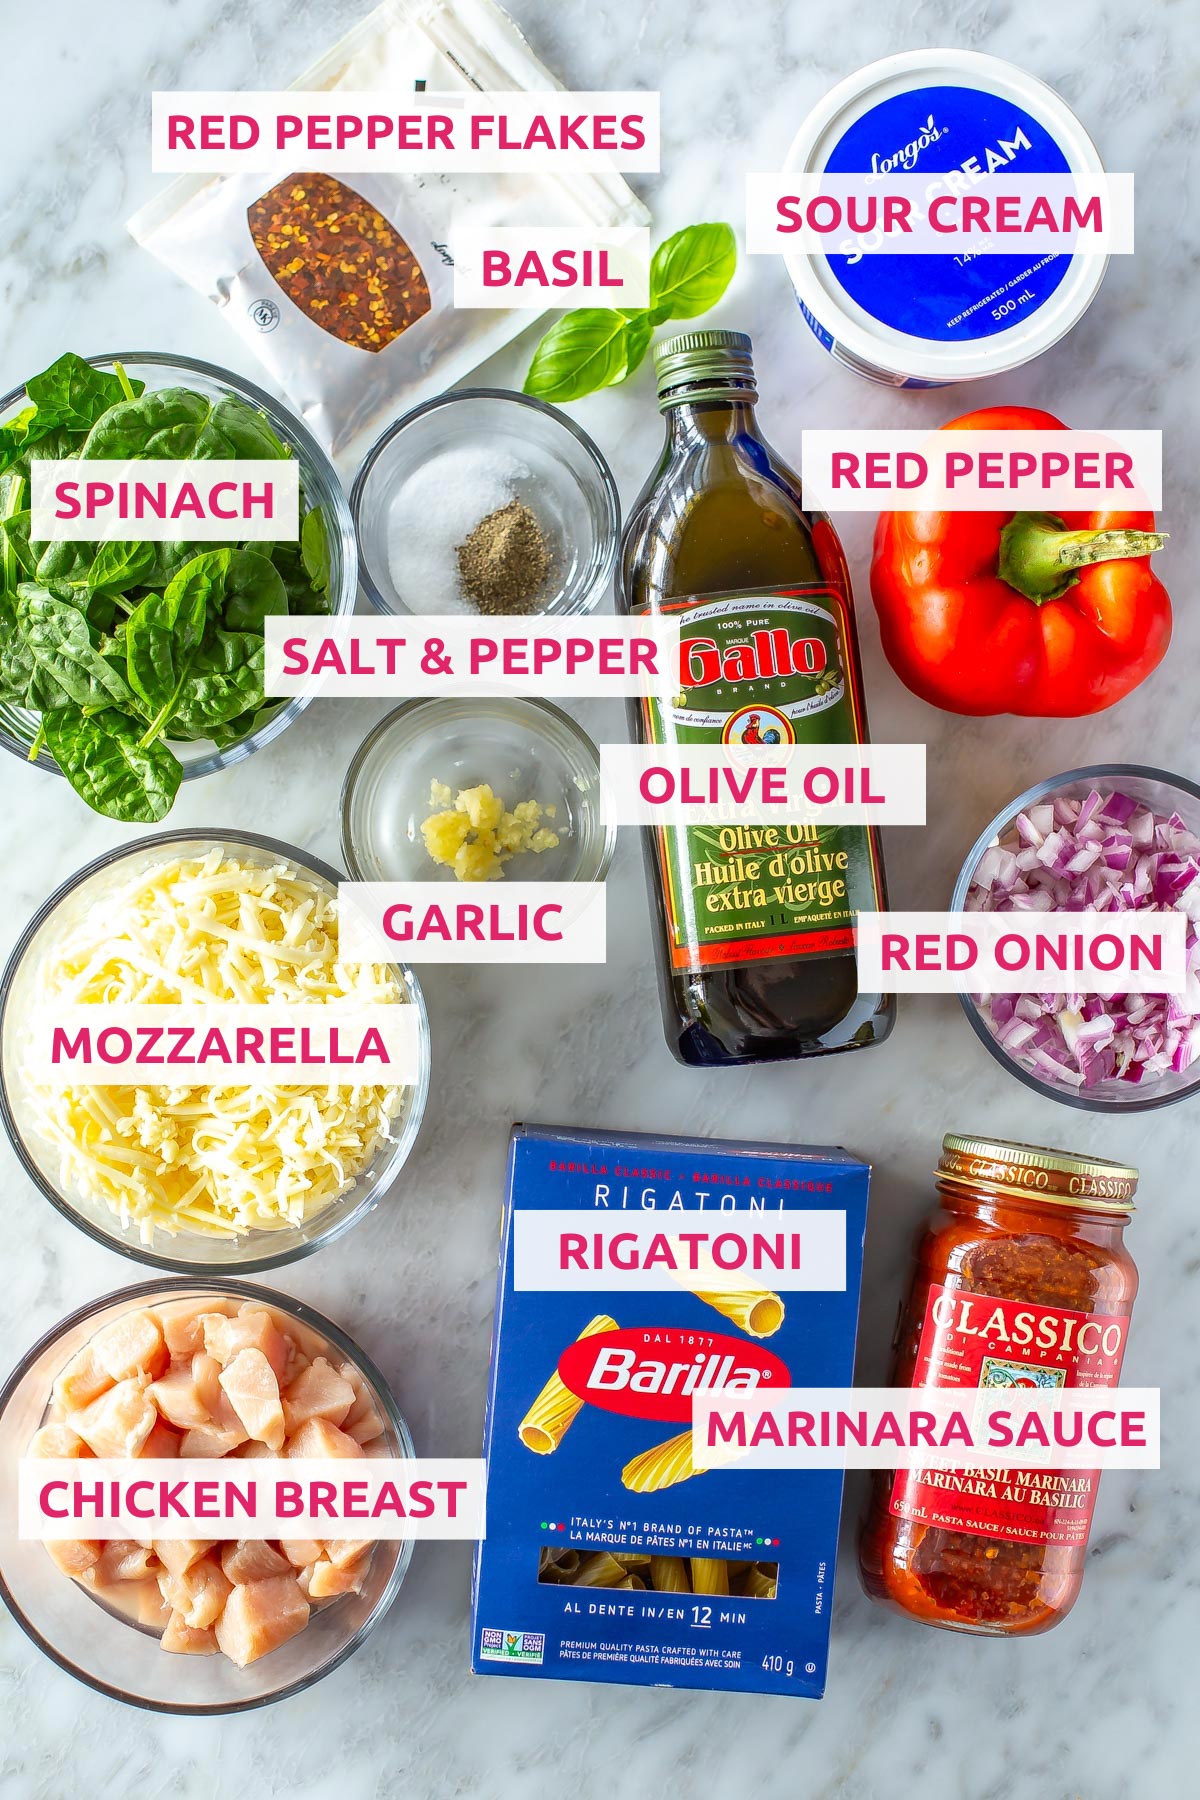 Ingredients for chicken pasta bake: chicken breasts, rigatoni, marinara sauce, mozzarella, garlic, olive oil, red onion, red pepper, spinach, salt, pepper, sour cream, basil and red chili flakes.